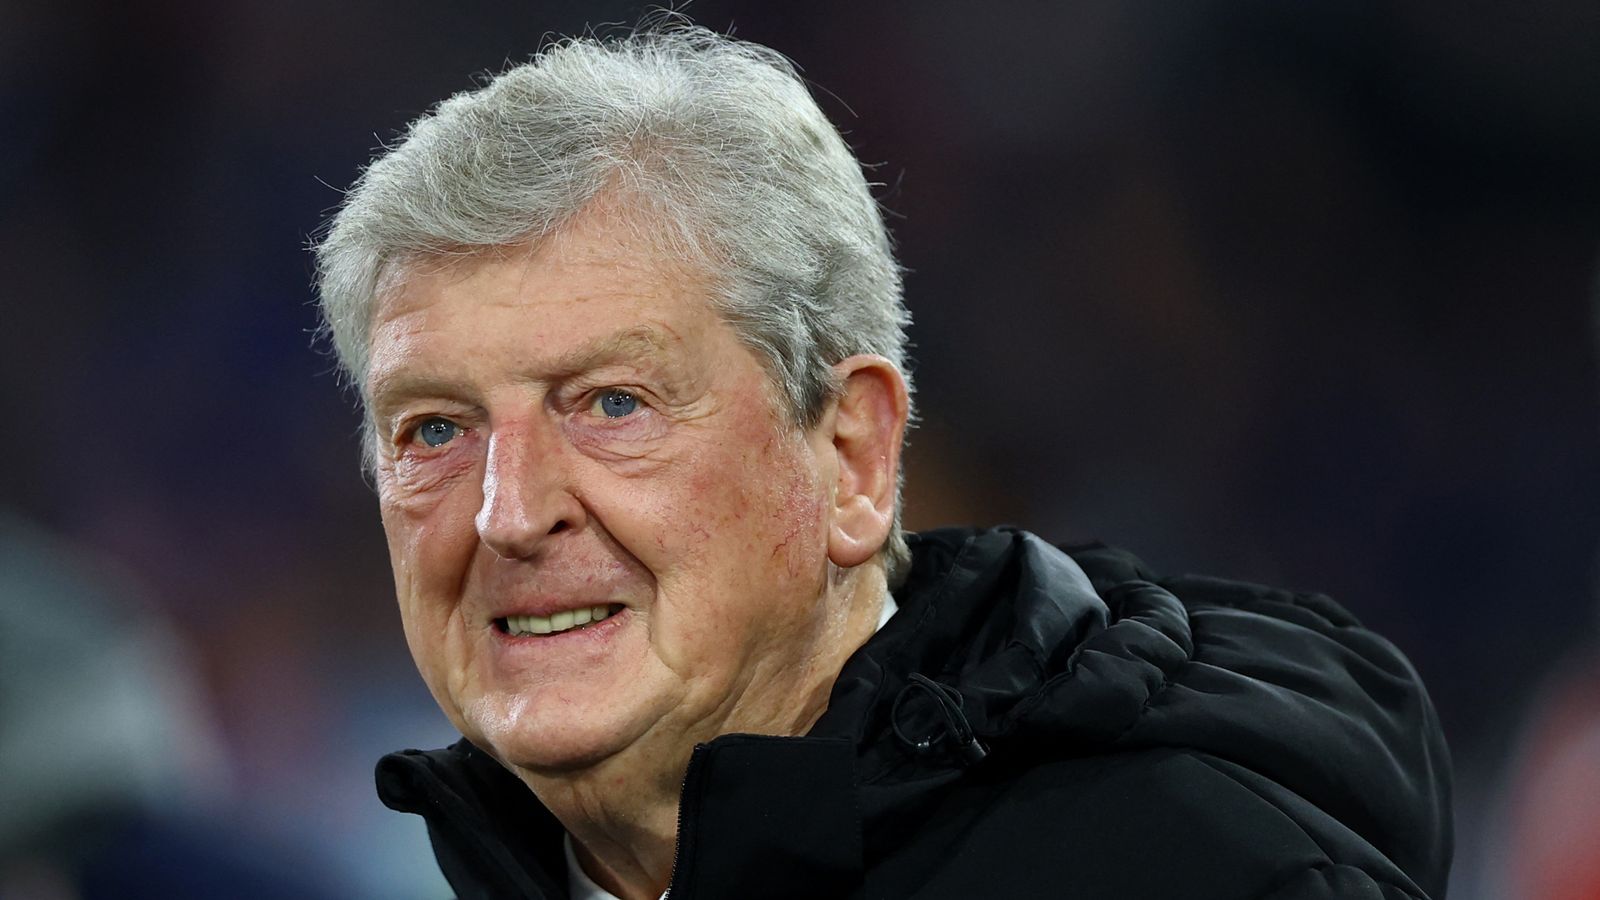 Roy Hodgson in hospital after being taken ill during Crystal Palace training session